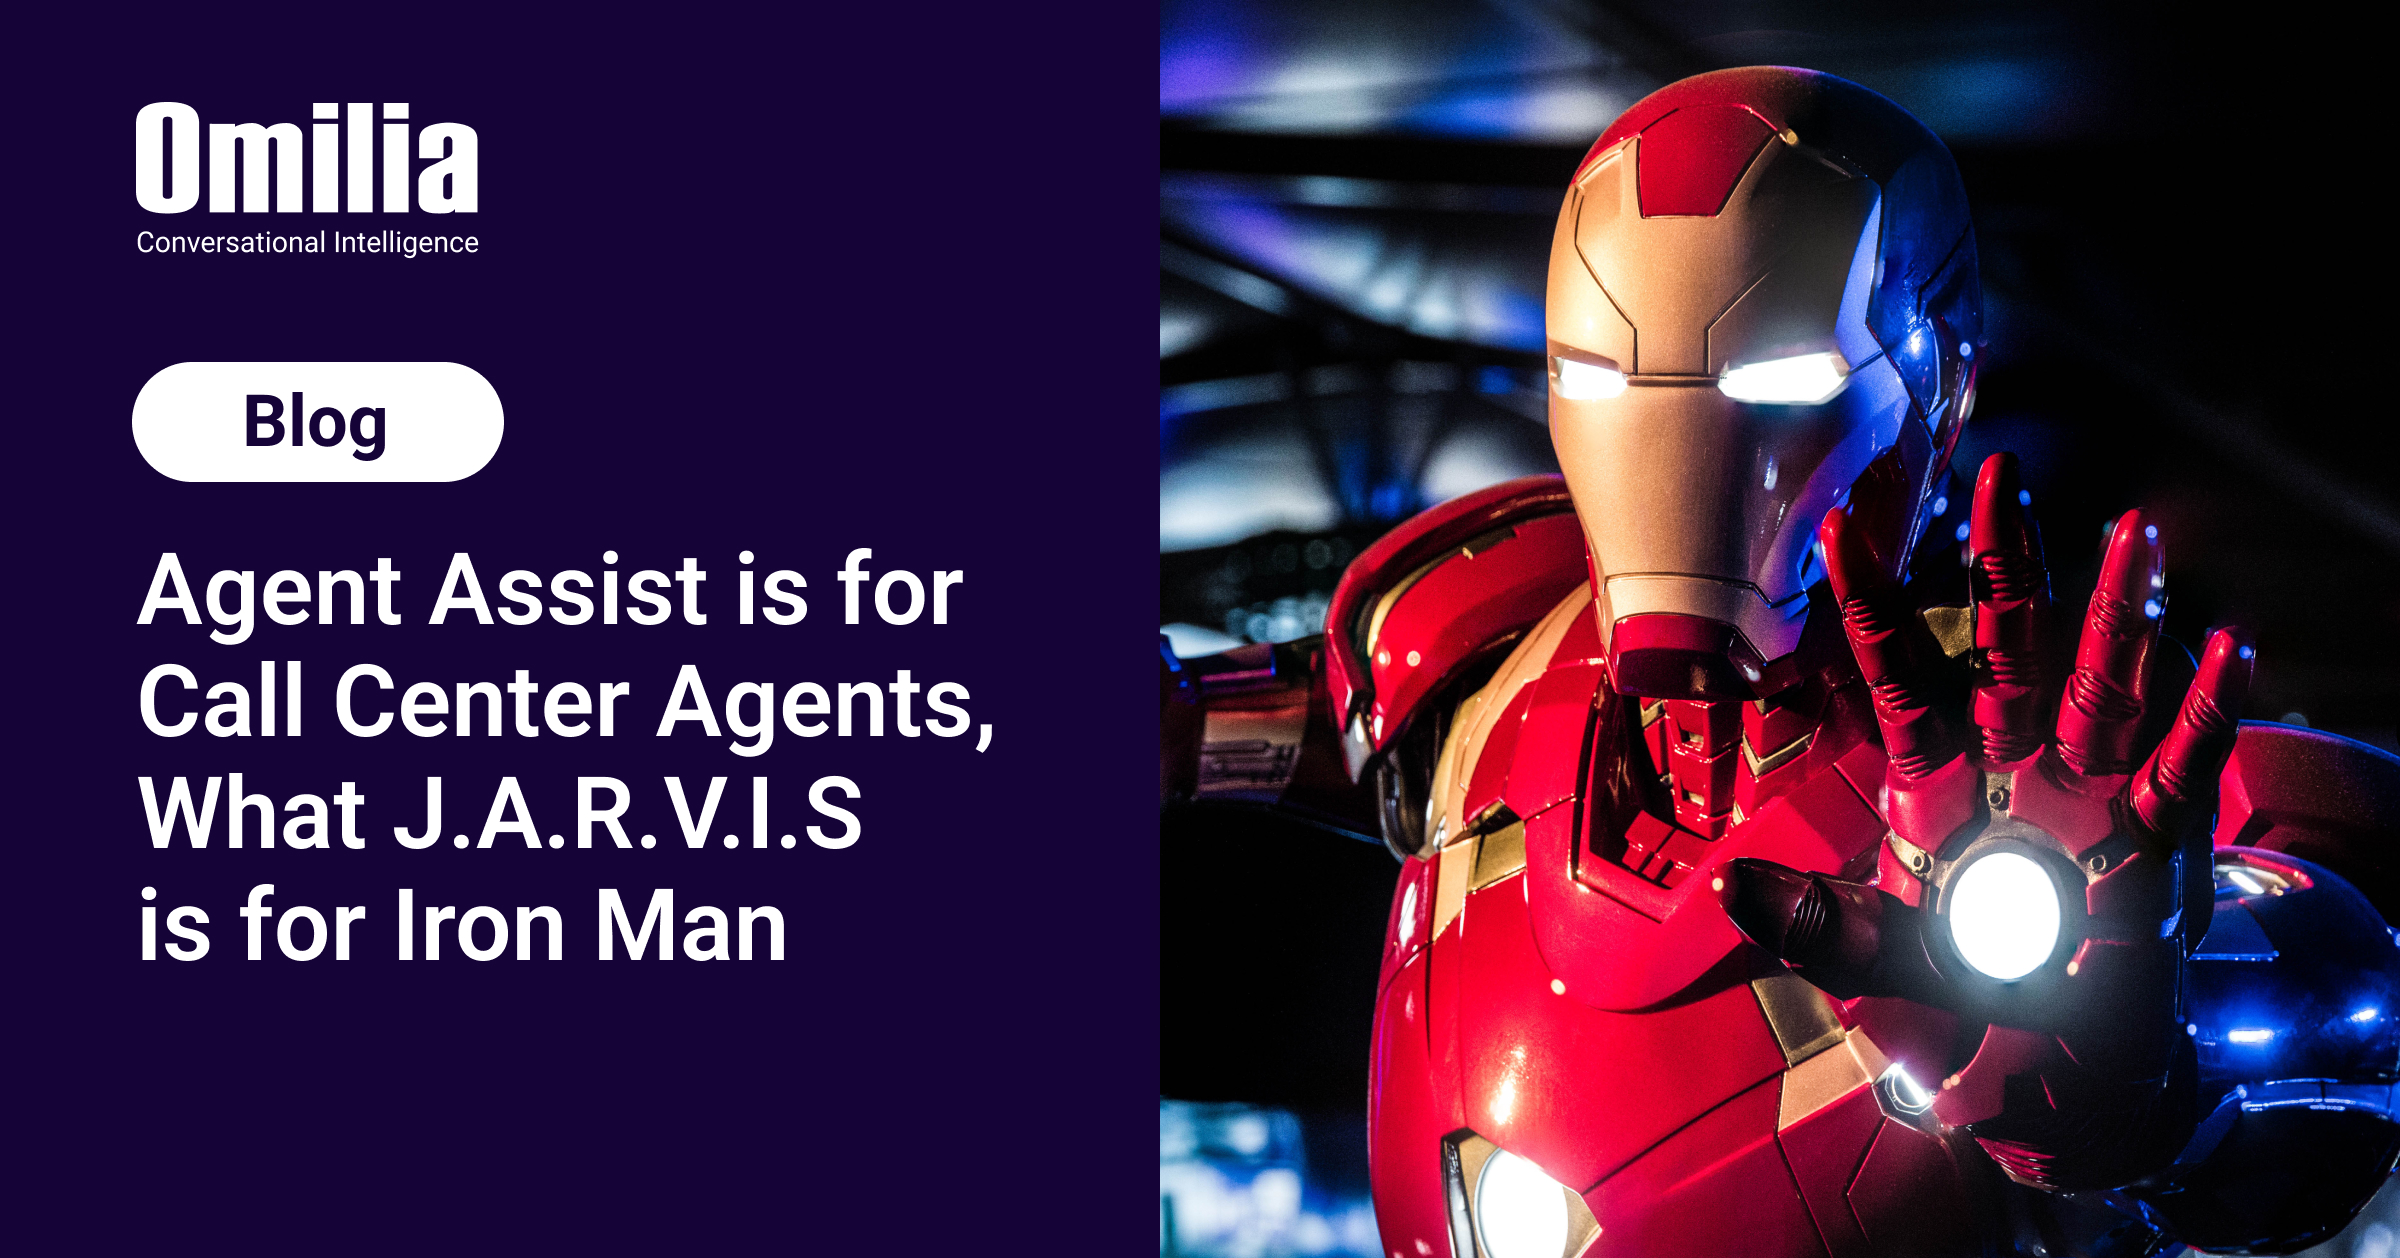 Agent Assist is for Call Center Agents, What J.A.R.V.I.S is for Iron Man